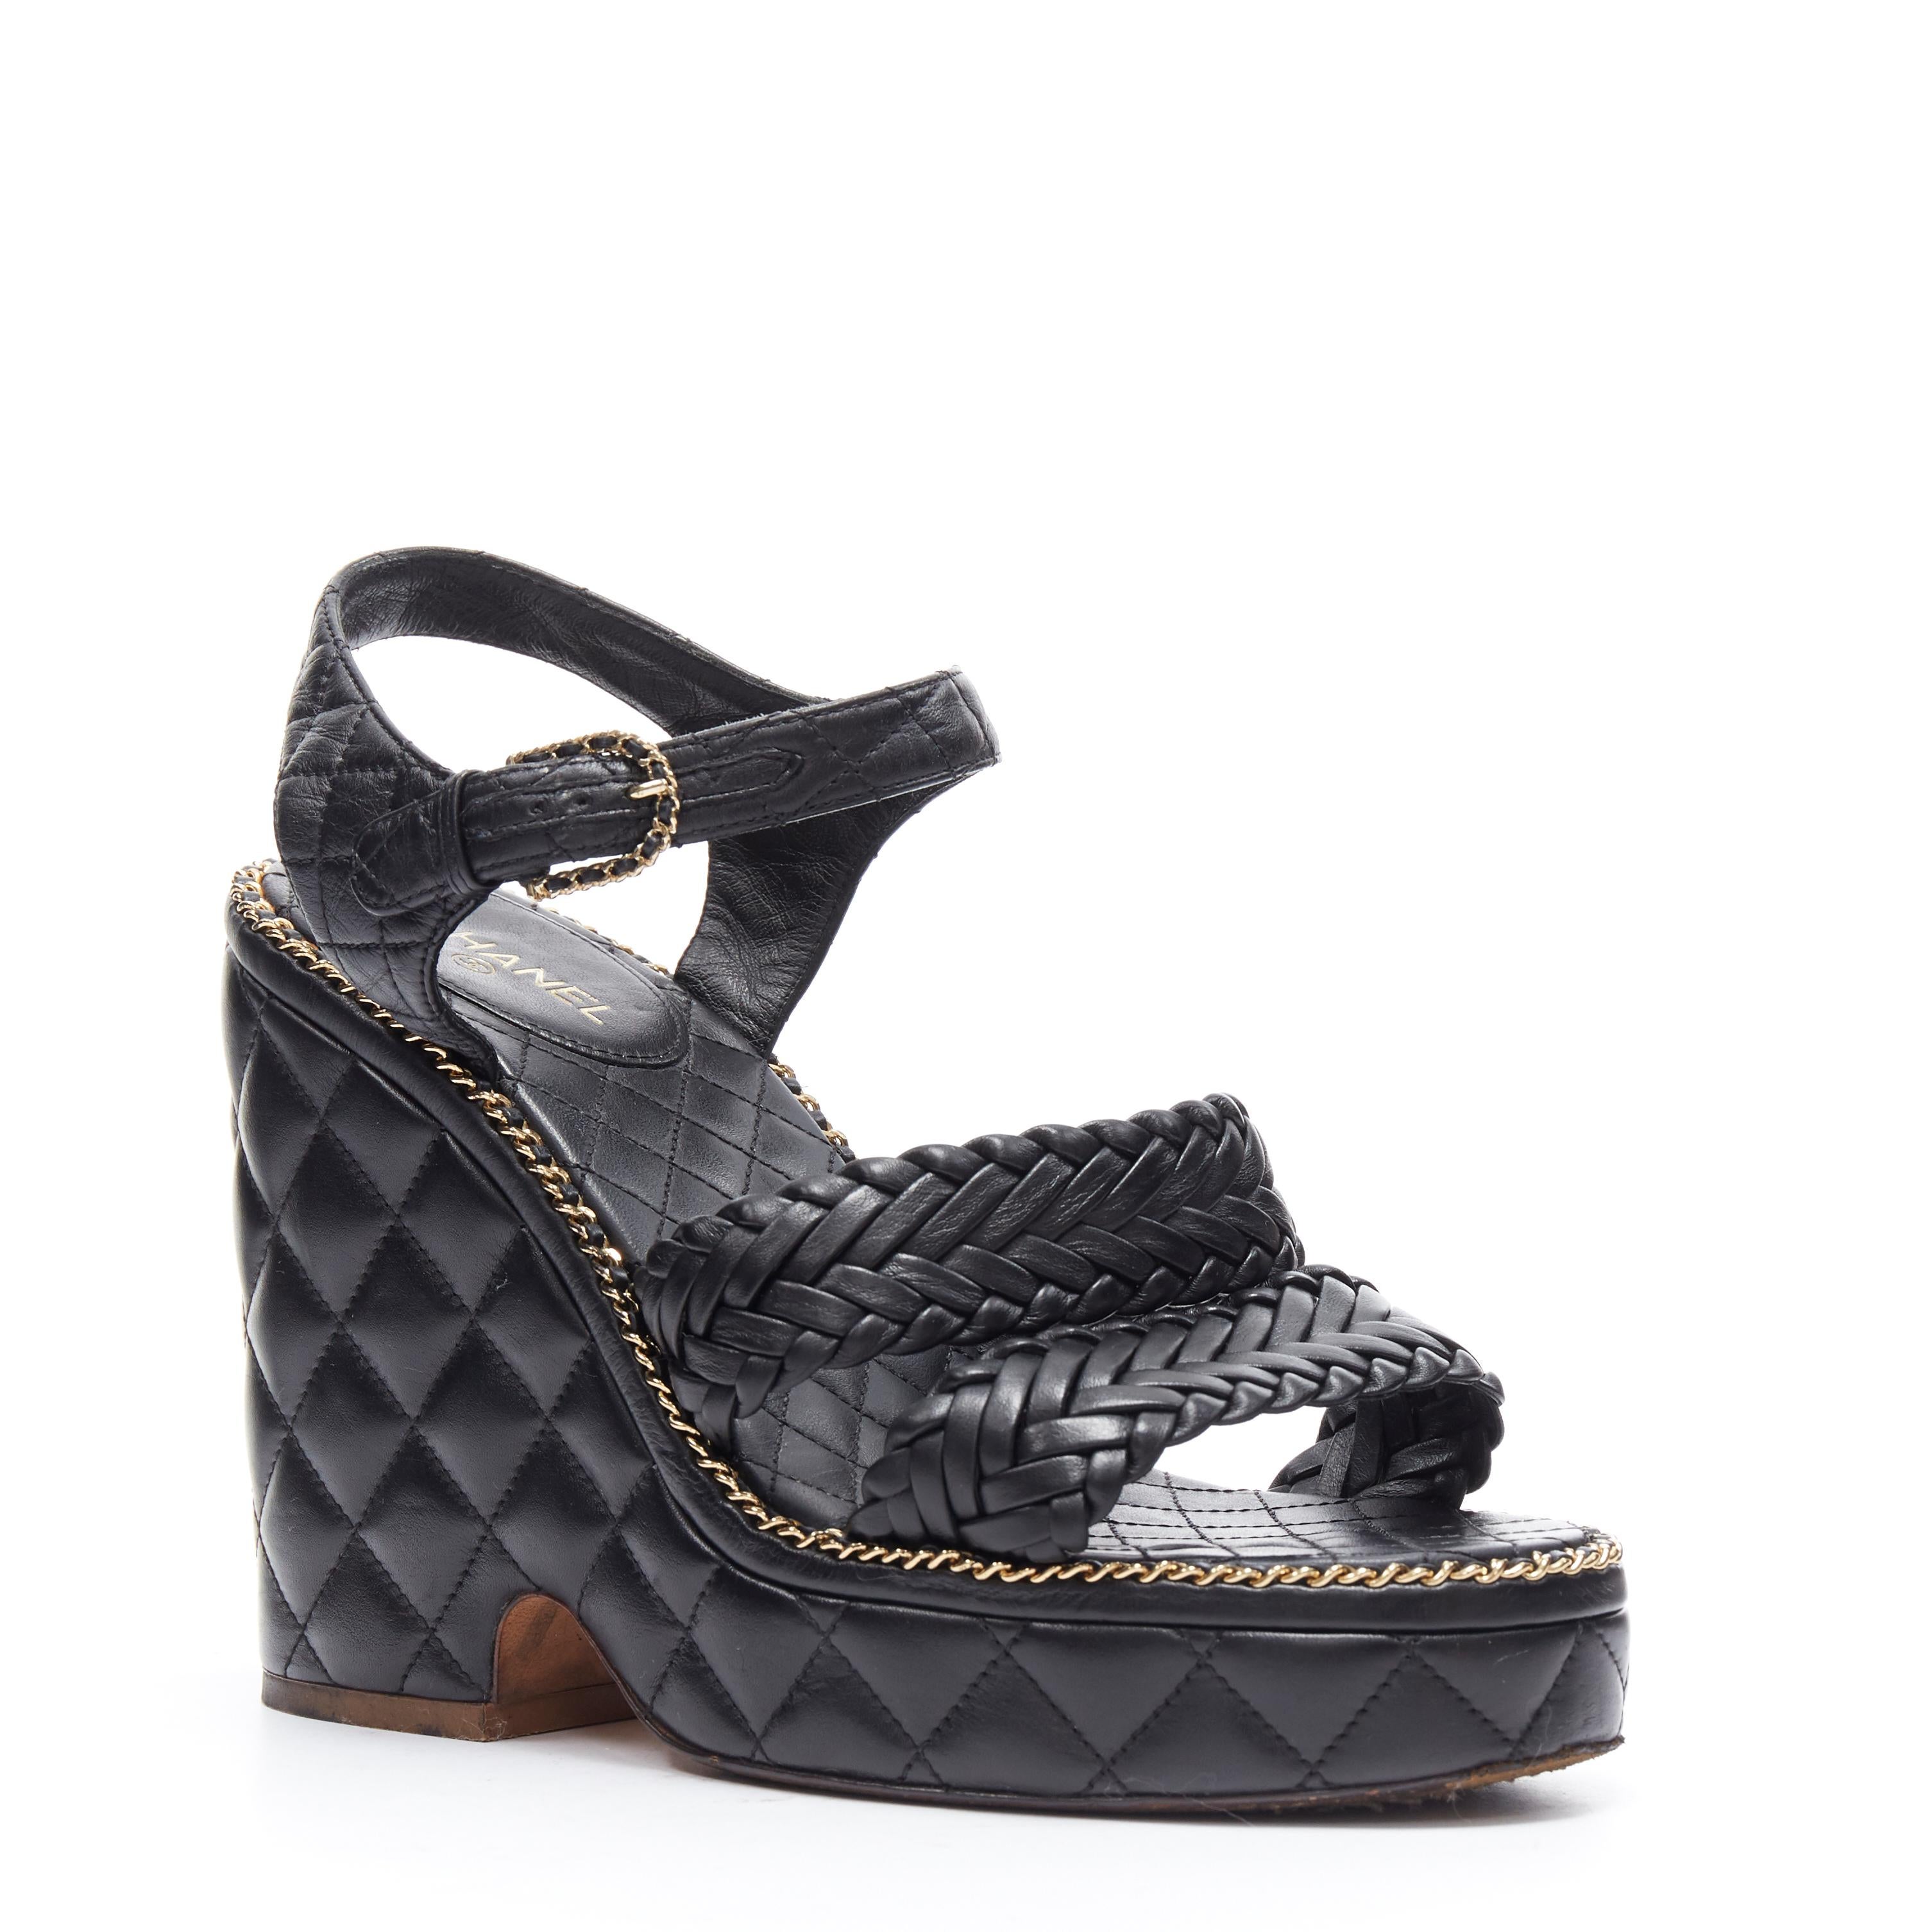 CHANEL SS15 black braided leather 2.55 chain diamond quilted wedge sandal EU39 
Reference: TGAS/A03452 
Brand: Chanel 
Designer: Karl Lagerfeld 
Model: Wedge 
Collection: Spring Summer 2015 Runway 
Material: Leather 
Color: Black 
Pattern: Solid